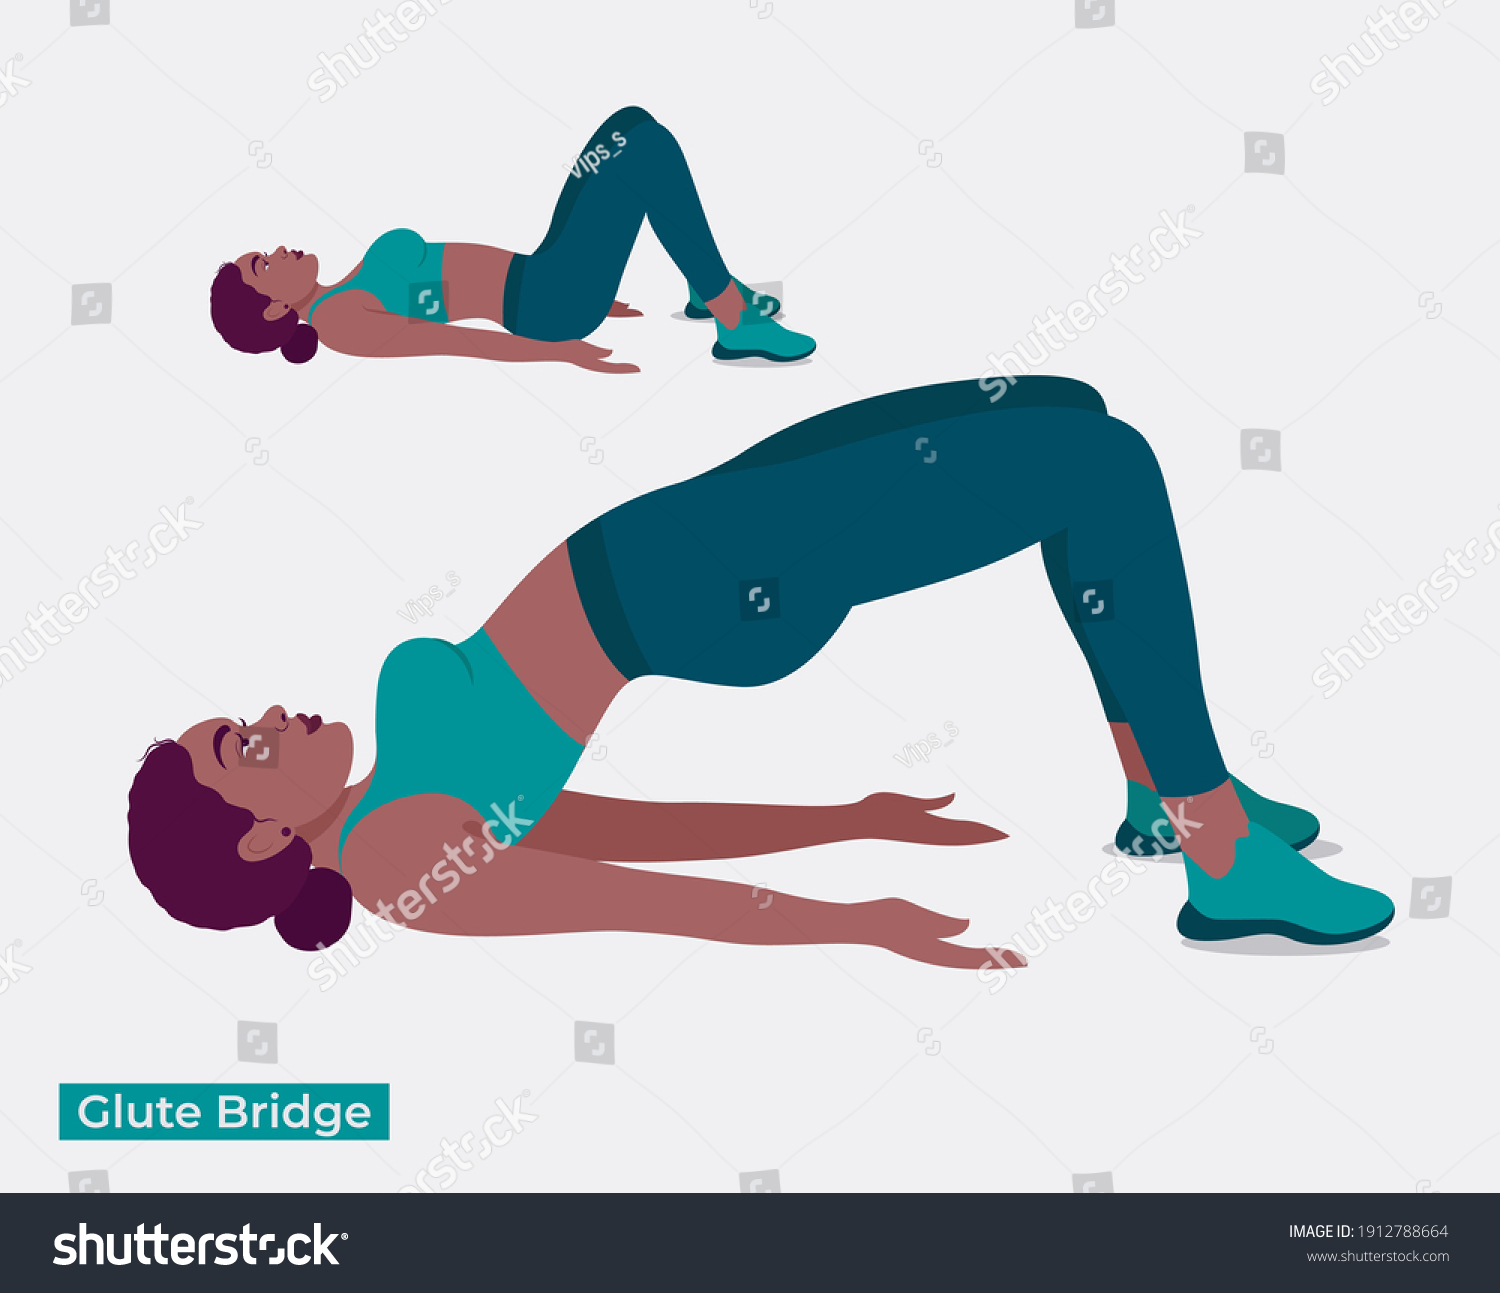 Glute Bridge Exercise Women Workout Fitness Stock Vector Royalty Free 1912788664 Shutterstock 3866